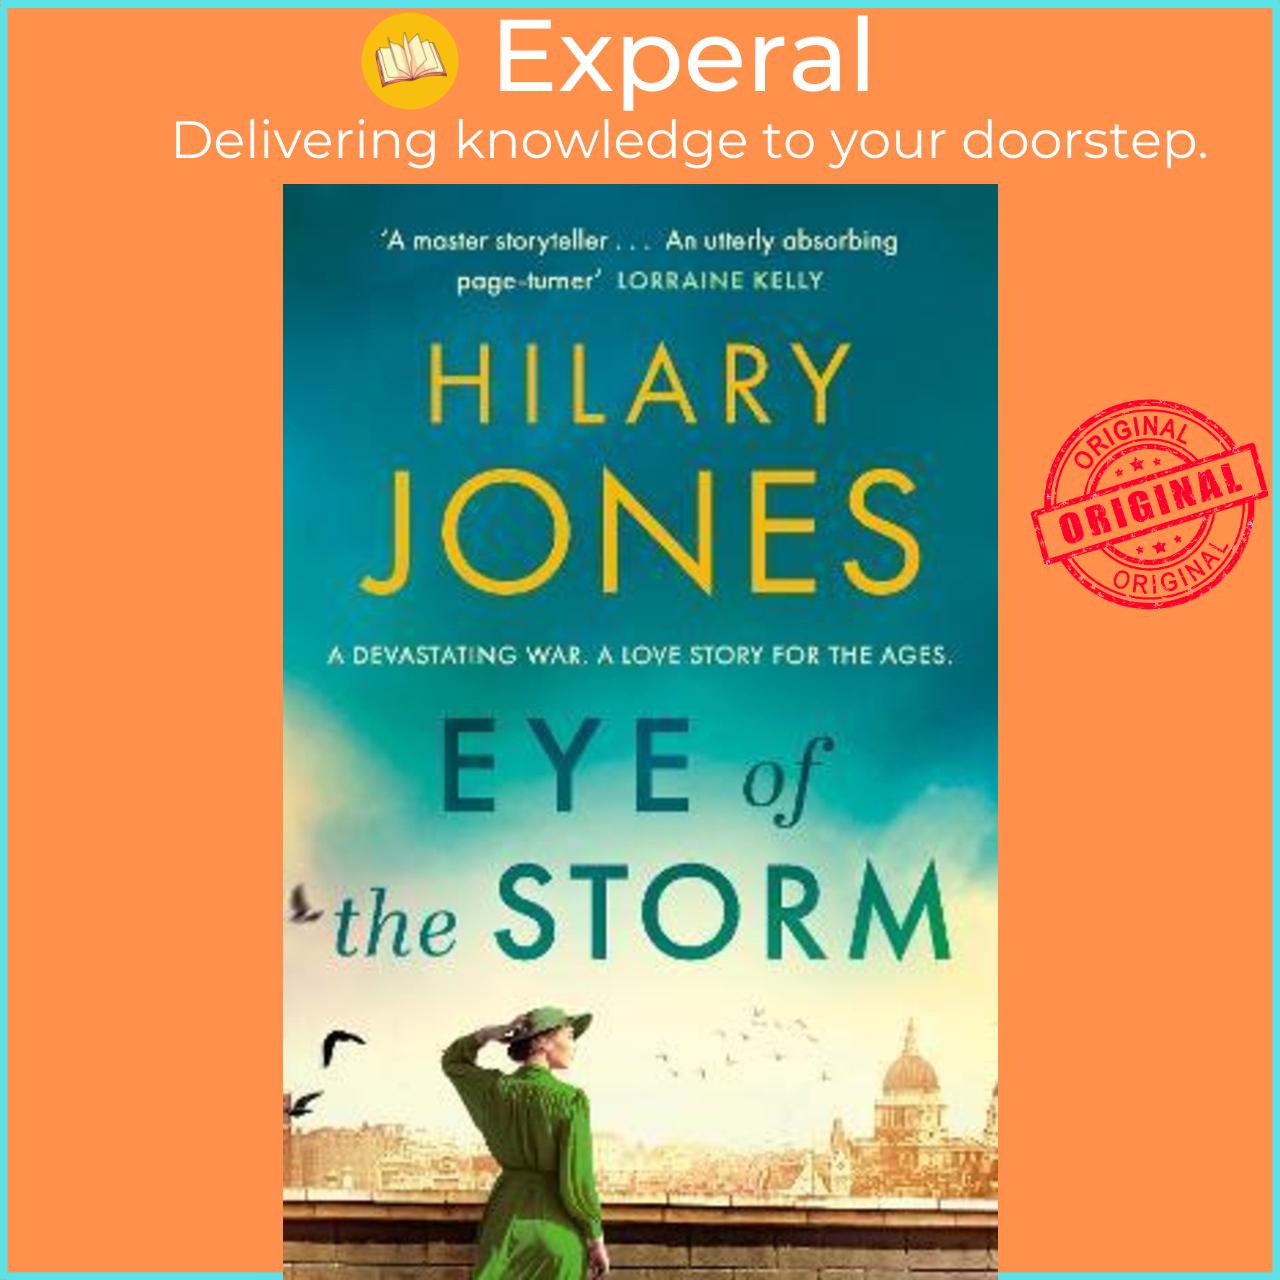 Sách - Eye of the Storm : 'An utterly absorbing page-turner' Lorraine Kelly by Hilary Jones (UK edition, paperback)